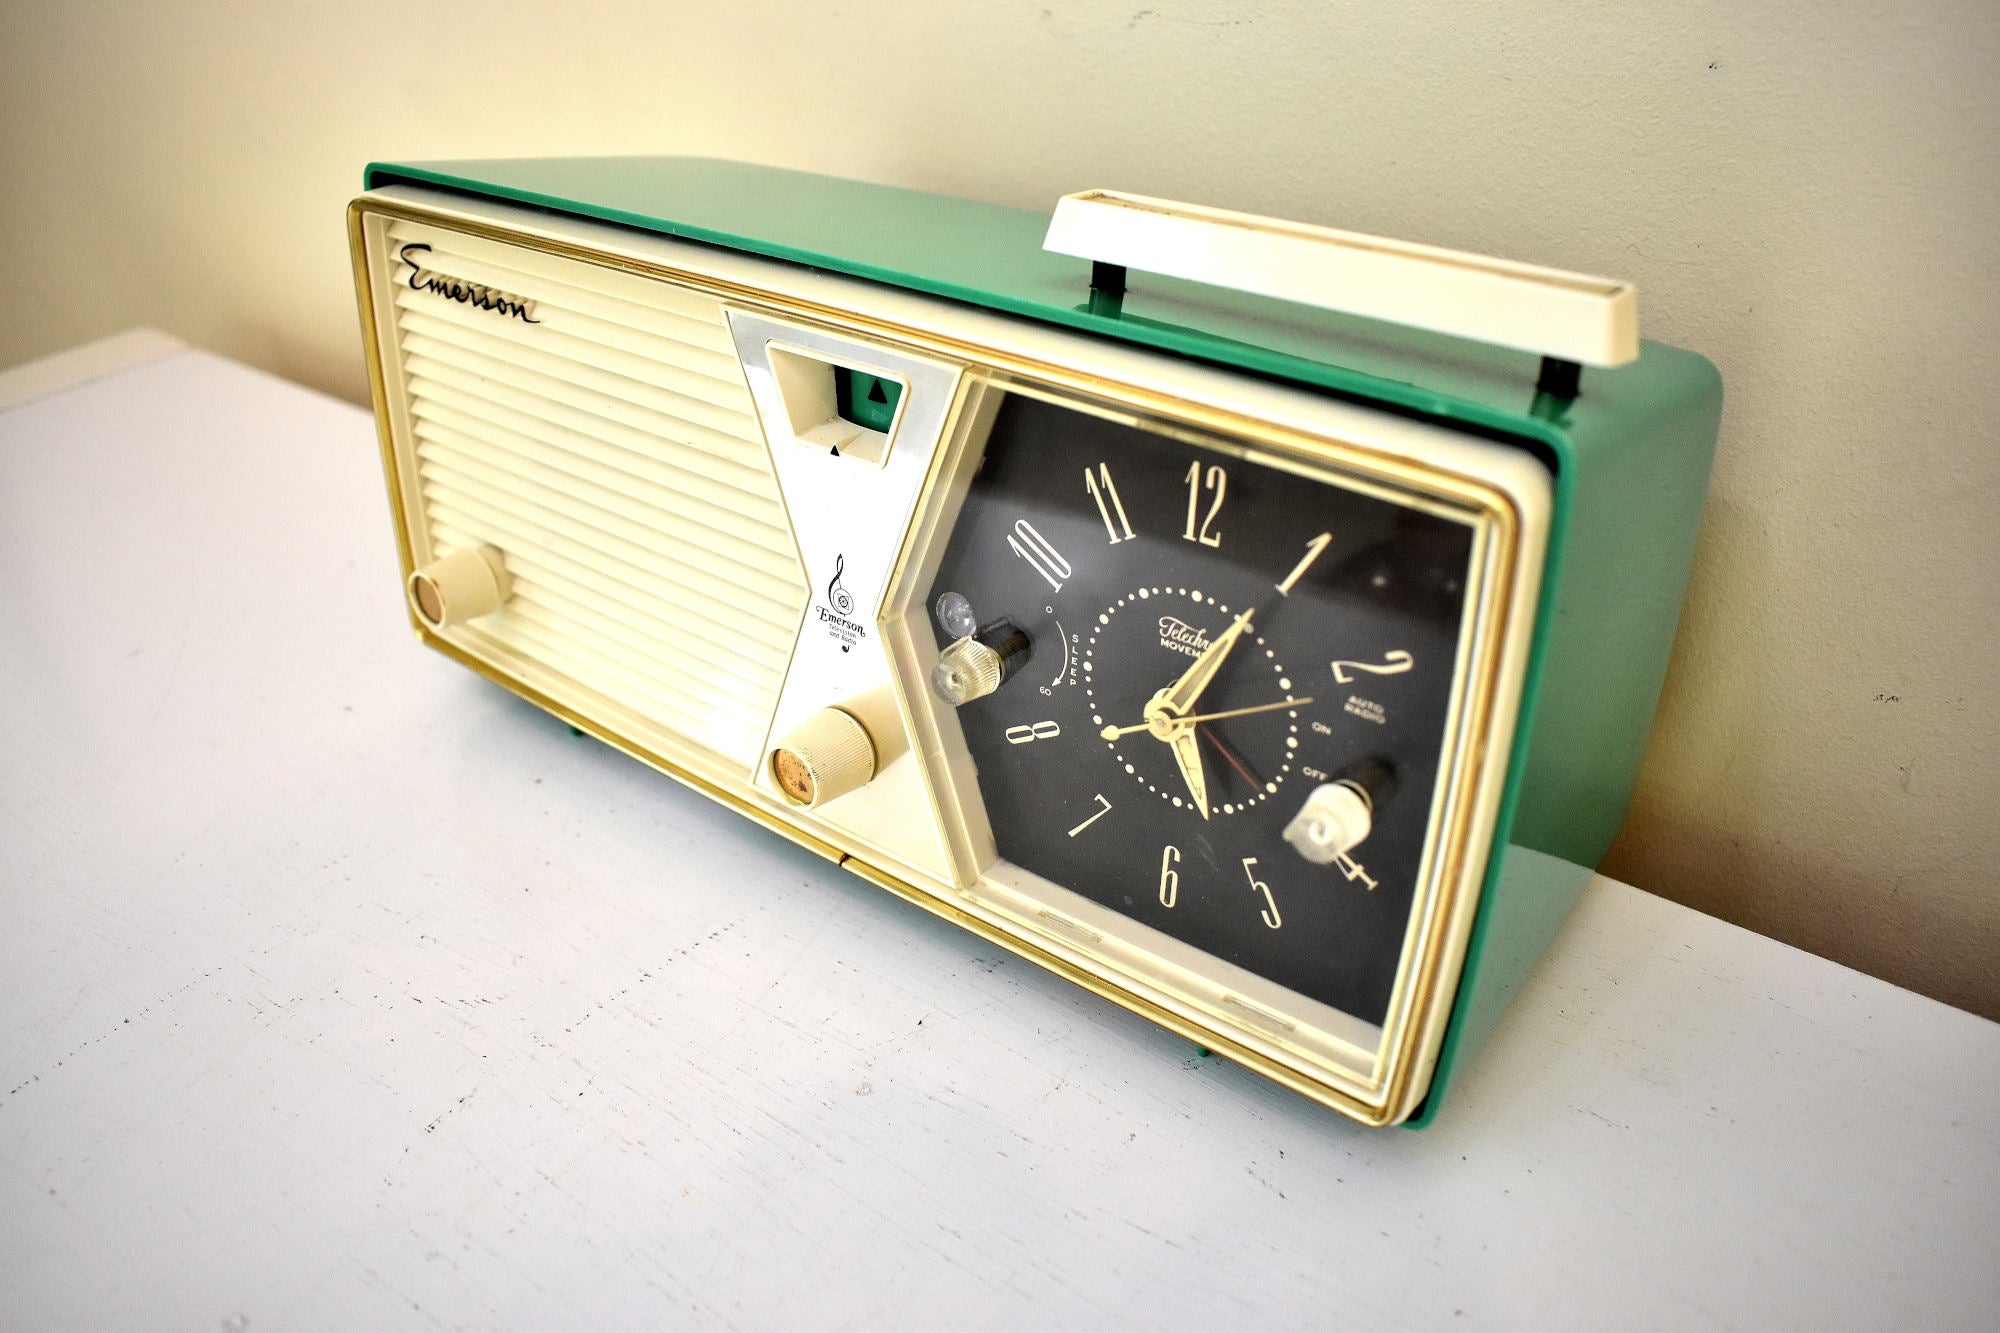 Shannon Green 1956 Emerson Model 919 Tube AM Radio Slapstick Clock Light Works! Great Color and Sound!